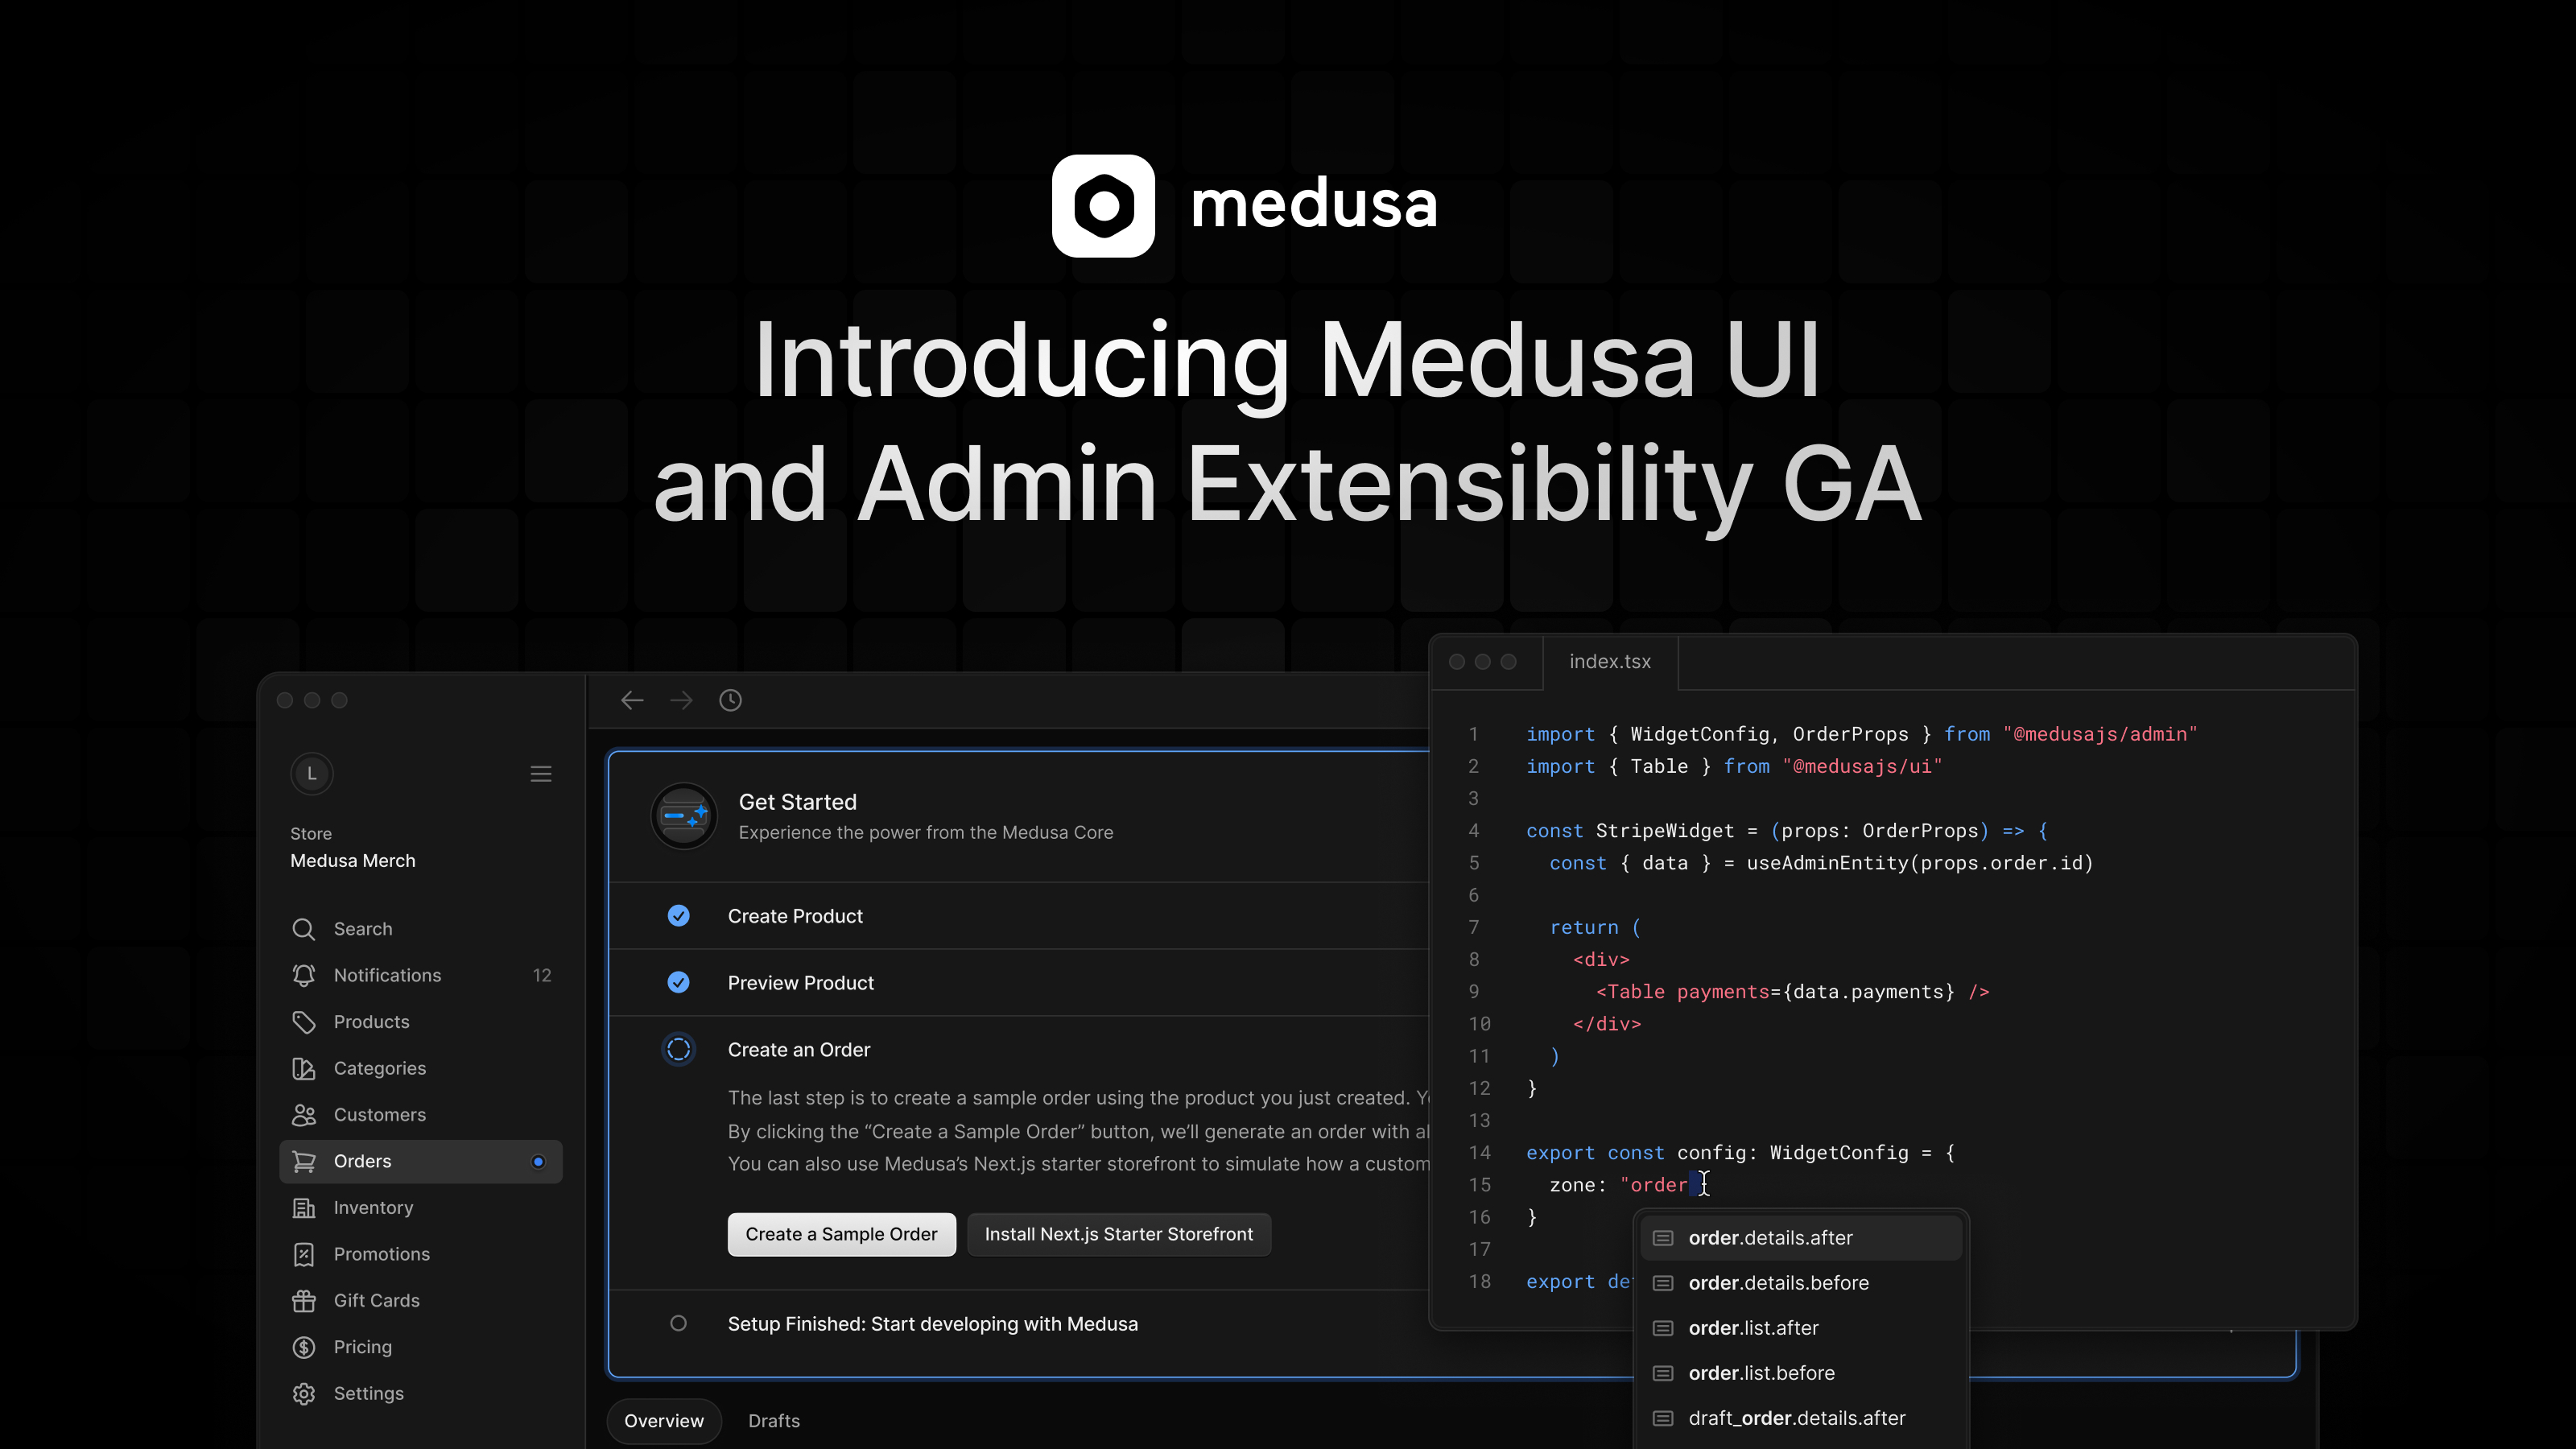 Medusa UI and general availability of Admin Extensions